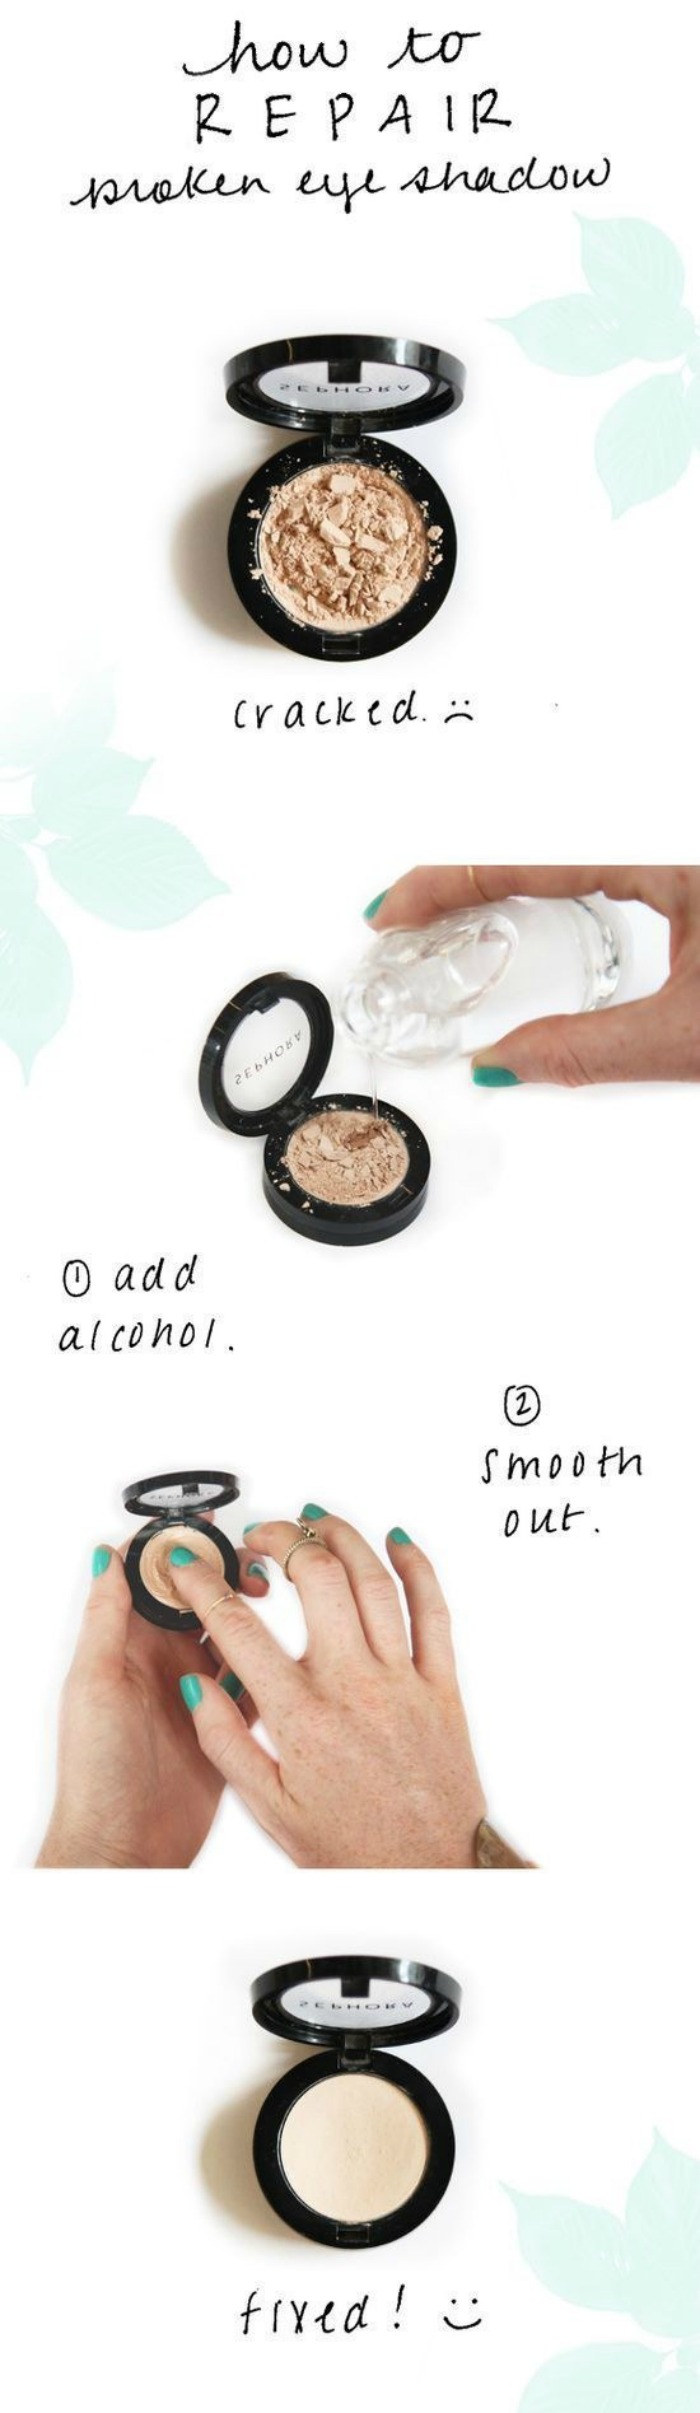 Save Broken Makeup with Rubbing Alcohol